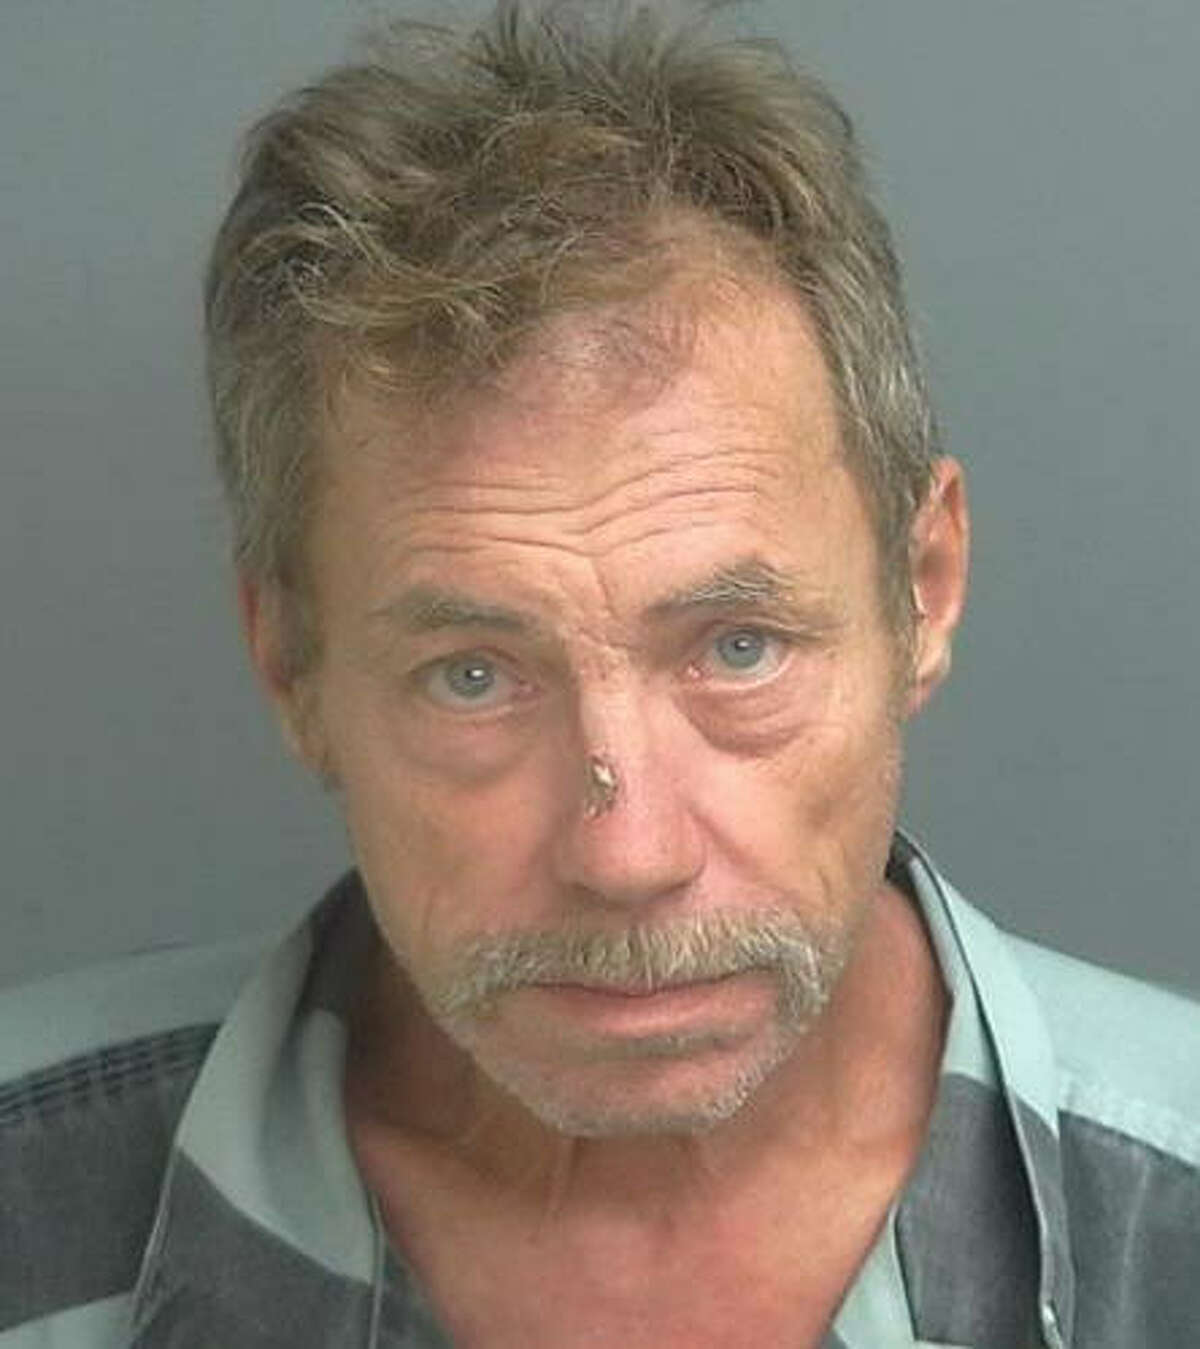 Martz, 62, was sentenced to life in prison on Thursday after his latest DWI conviction.